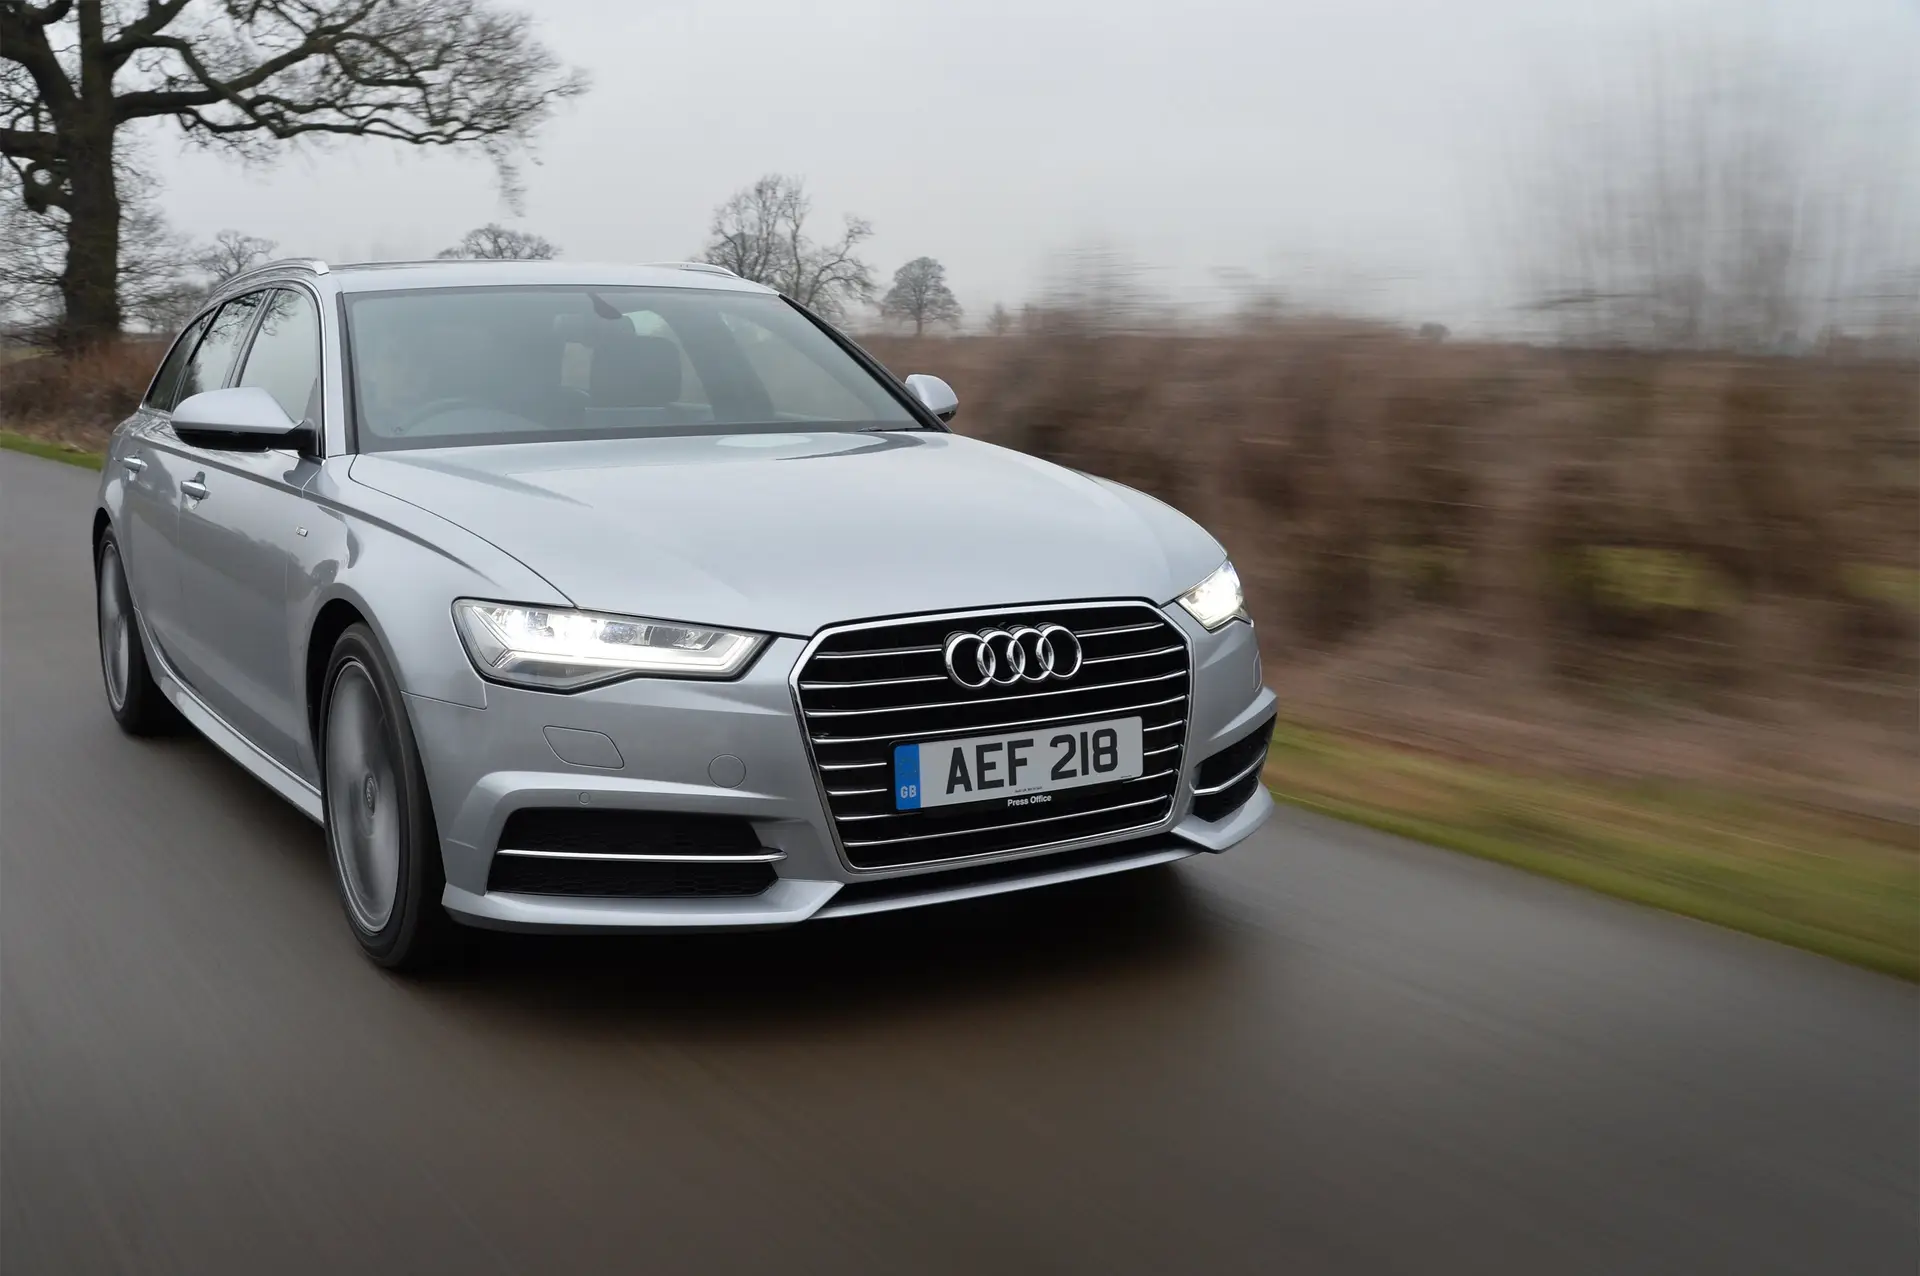 Audi A6 Avant (2011-2018) Review: exterior front three quarter photo of the Audi A6 Avant on the road